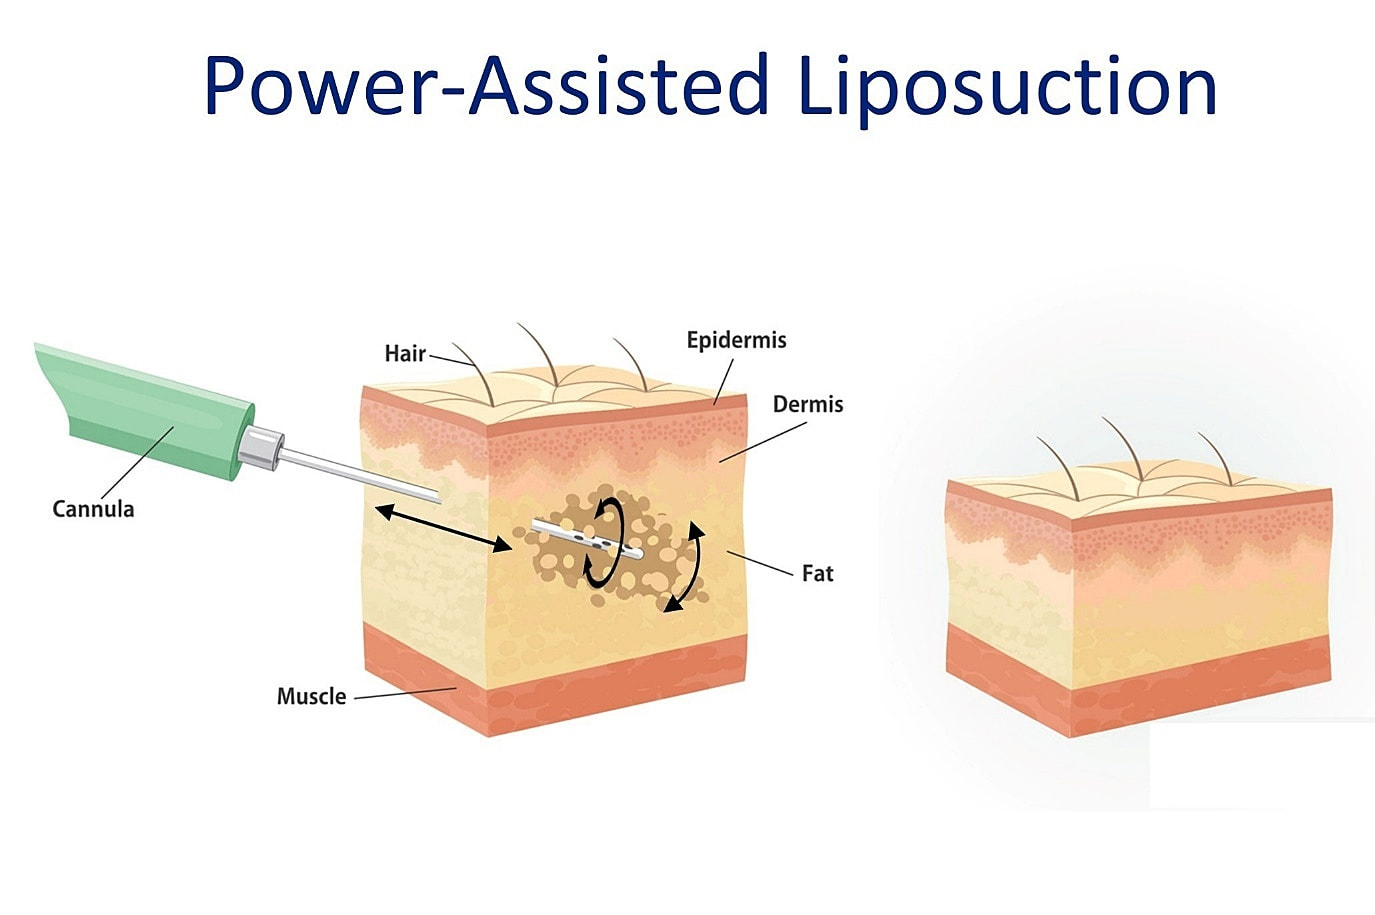 Power-Assisted Liposuction